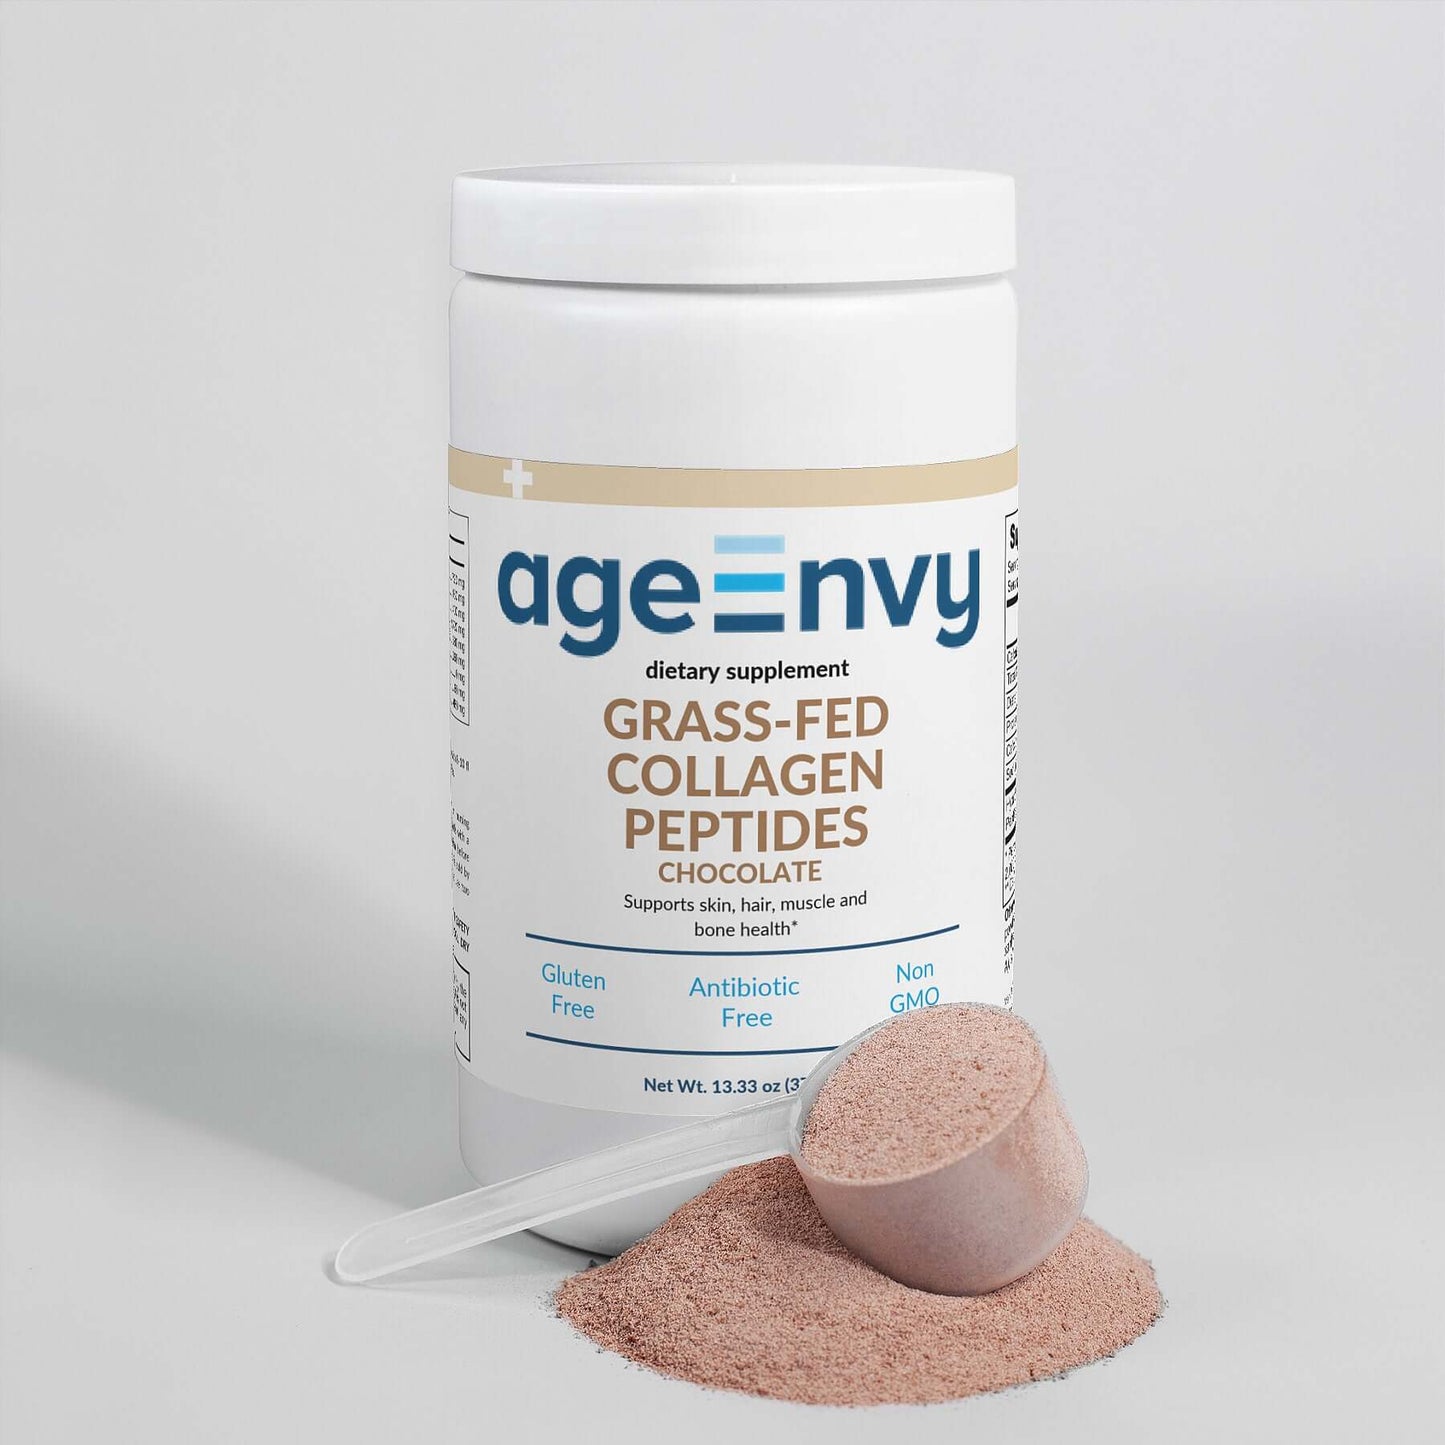 Grass-Fed Collagen Peptides Chocolate by AgeEnvy